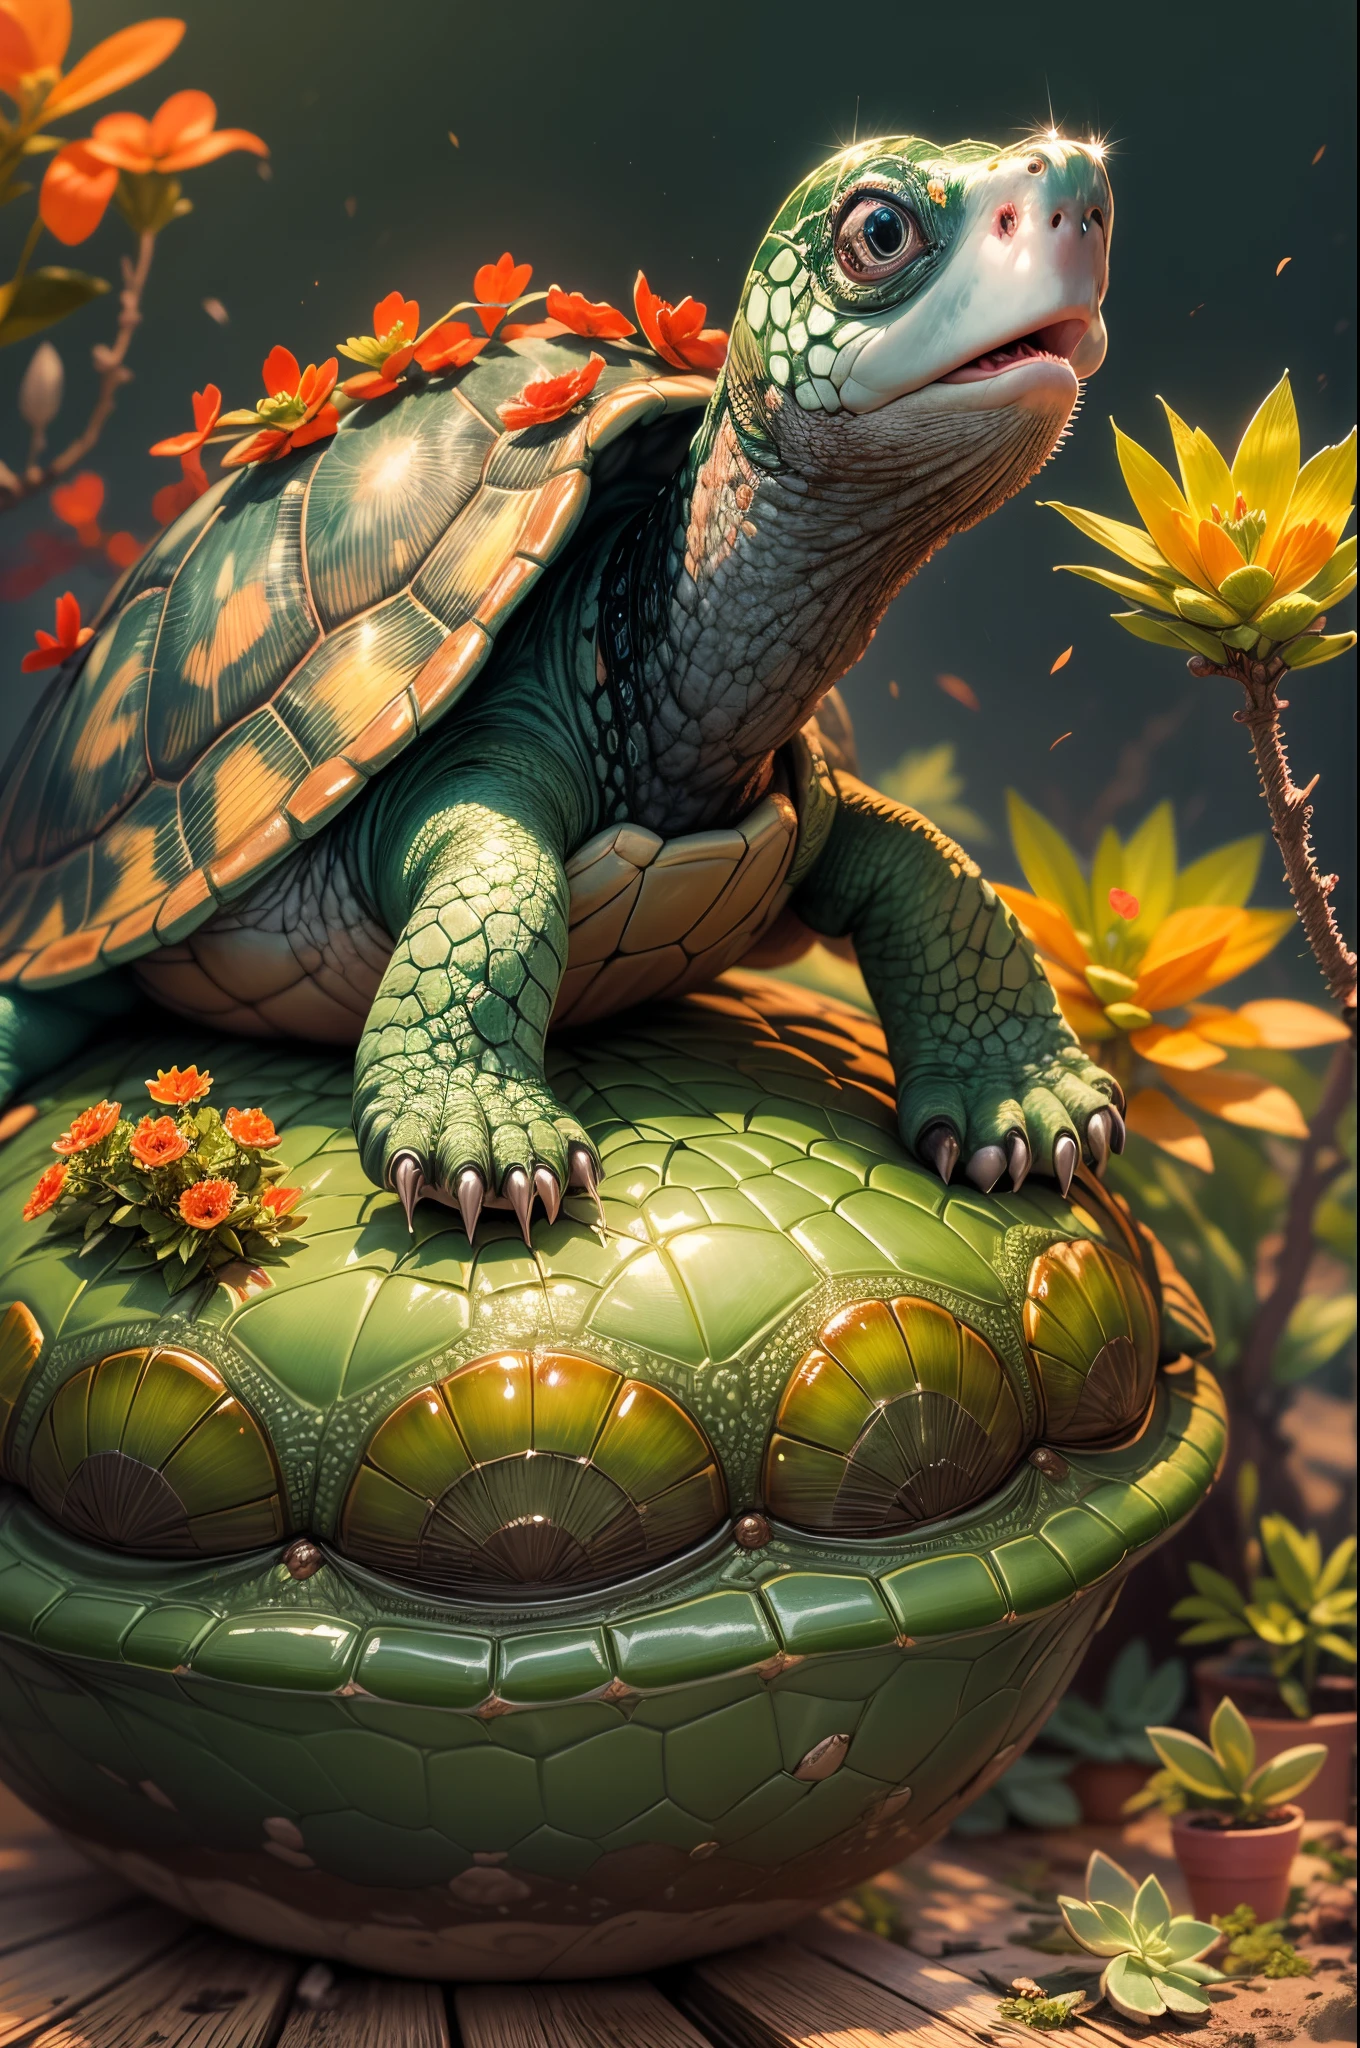 best quality,highres,ultra-detailed,cute turtle carrying out a succulent plants image,Succulent plants,green leaves,rounded shape,thick stems,variety of textures and colors,hairy surface,detailed patterns,grow in a pot,small size,plenty of sunlight,bright and vibrant colors,delicate and intricate details,soft and smooth texture,lush and healthy appearance,nurturing and caring environment,sturdy and strong turtle shell,adorable and friendly expression,curious and playful behavior,moving with agility and grace,harmonious combination of nature and animal,sharp focus on the turtle and plants,realistic depiction of the succulent plants,impressive rendering of the turtle's shell,artistic portrayal with vivid colors,perfect balance of light and shadow,studio lighting highlighting the main subject,enhanced depth of field creating a three-dimensional effect,exquisite attention to detail,expressive emotions captured in the turtle's eyes,artistic interpretation of nature's harmony.